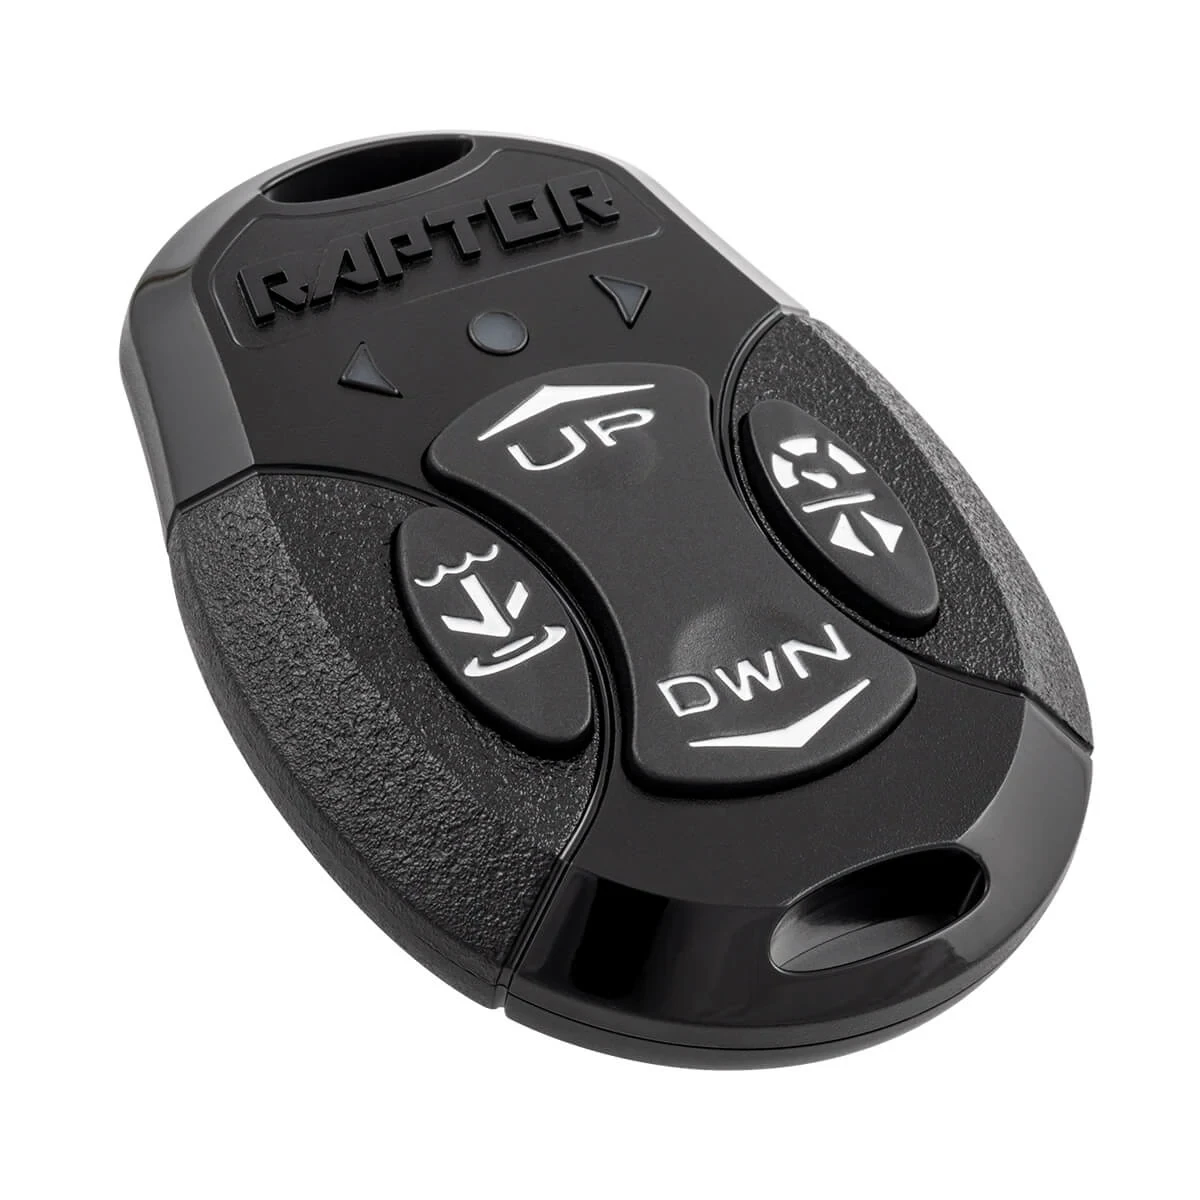 Black, round remote for Raptor with buttons for Up, Down, and Anchoring Modes